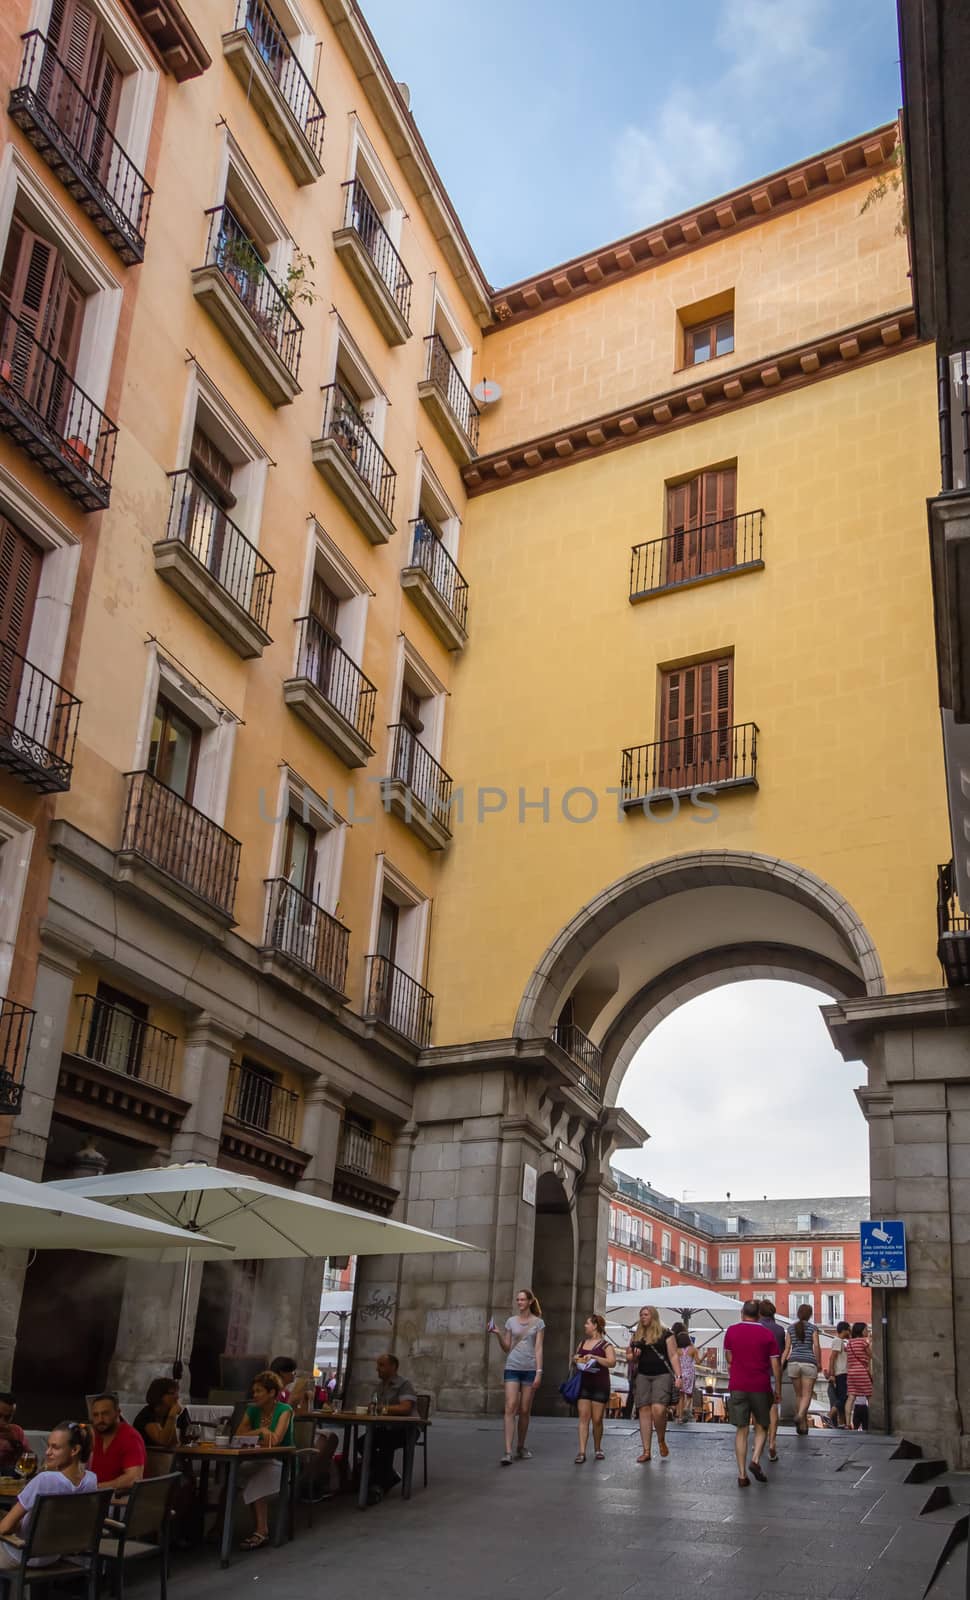 MADRID, SPAIN - SEPTEMBER 2: Archway entrance to the central square of Plaza Mayor, in Madrid, Spain, on September 2, 2013